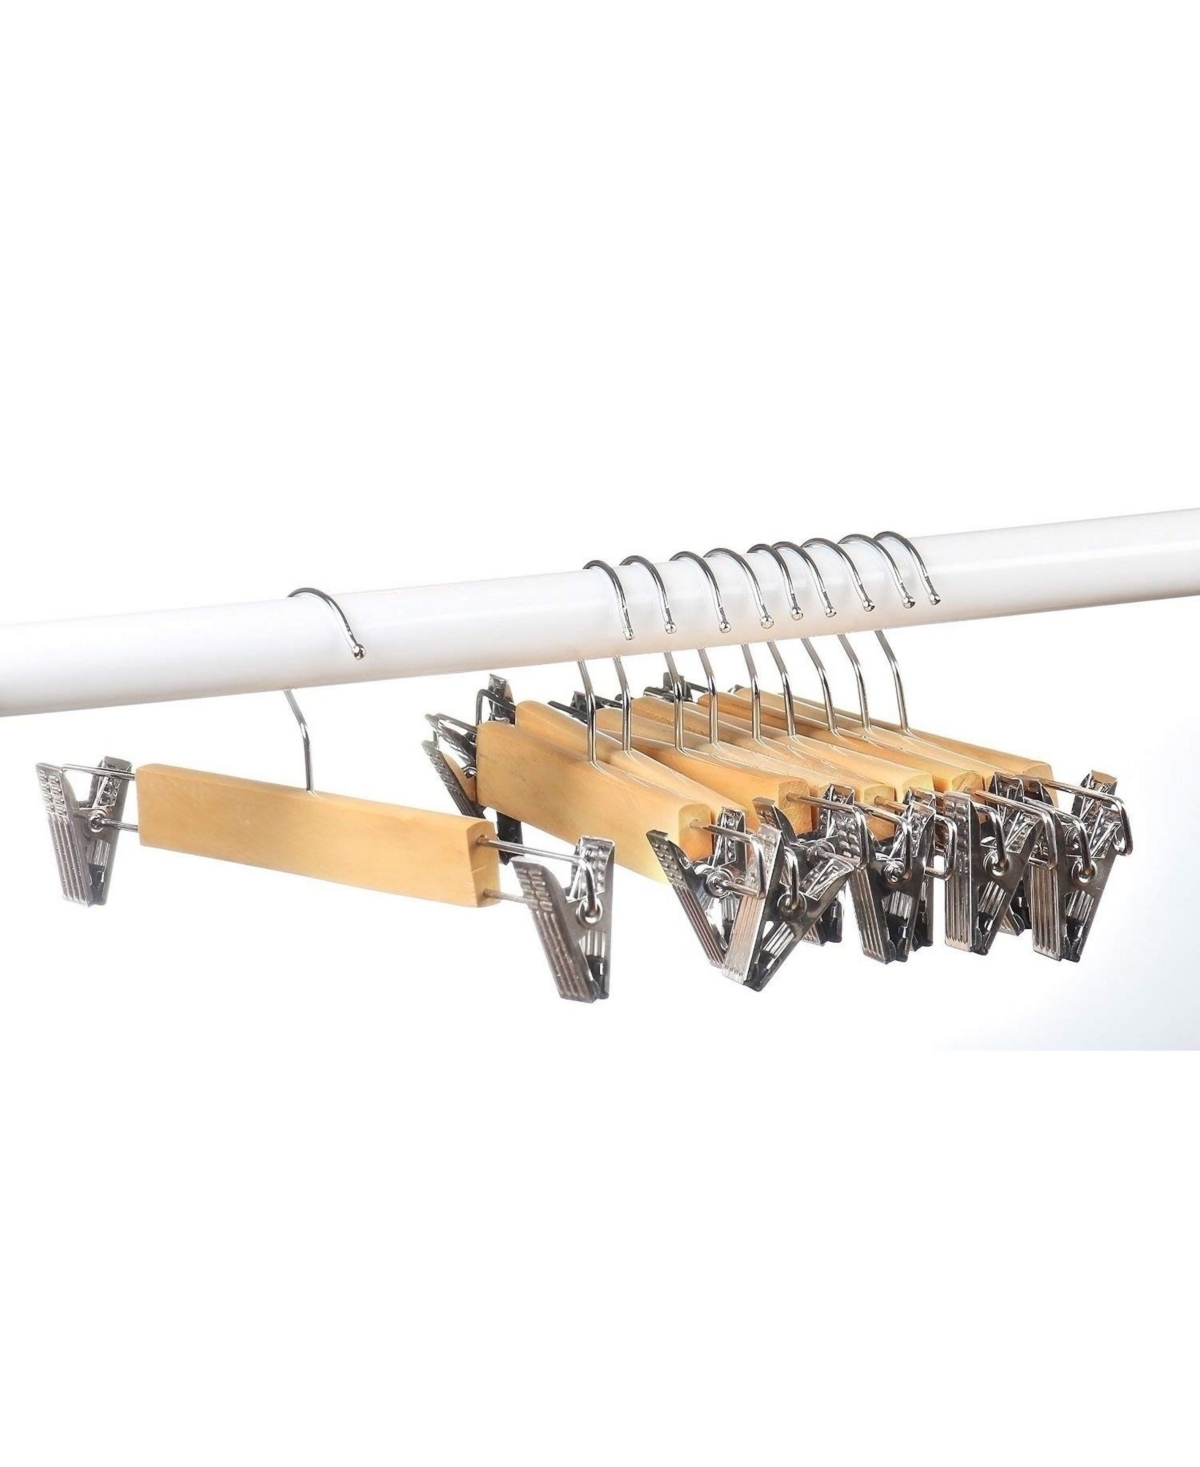 10 Pack Wood Hangers with Metal Clips - Wood Hangers for Suits, Skirts, or Pants Hangers - Wood